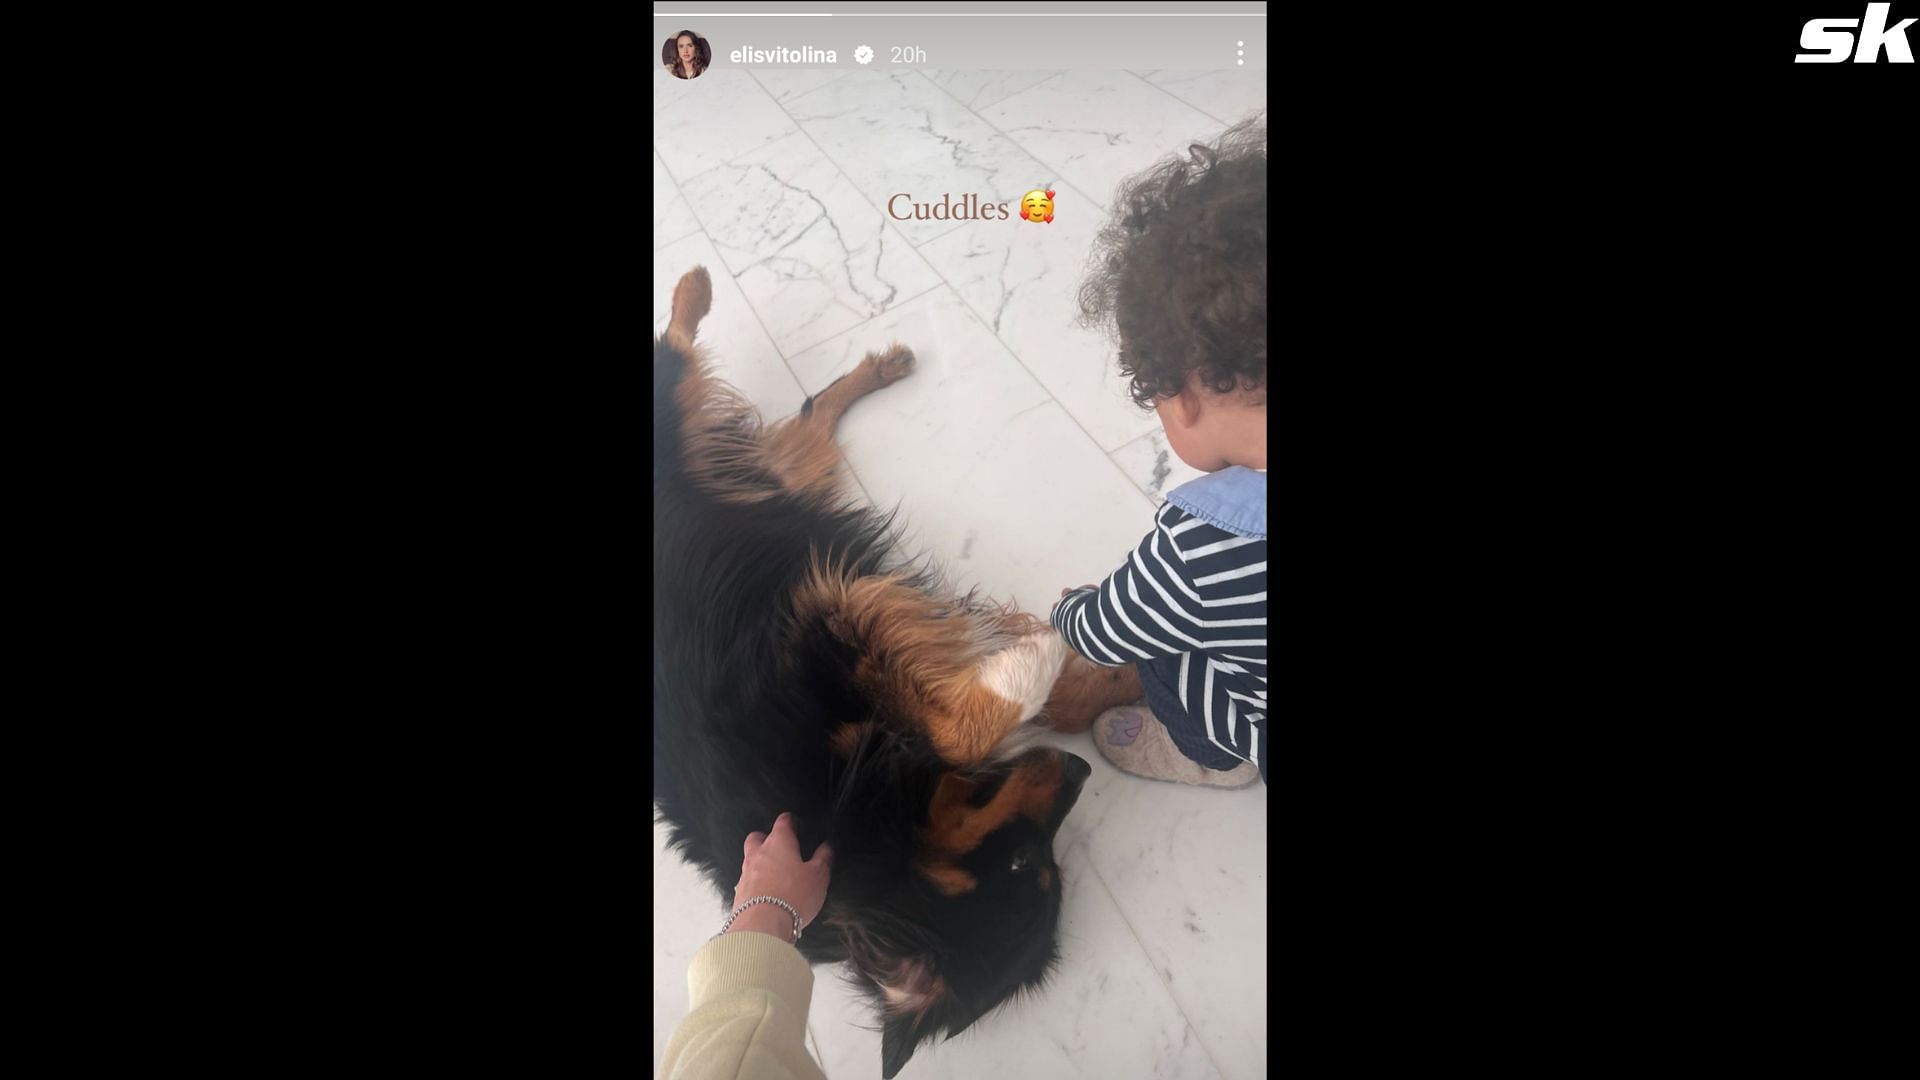 Elina Svitolina captures a heartwarming moment between daughter Skai and her dog at their home